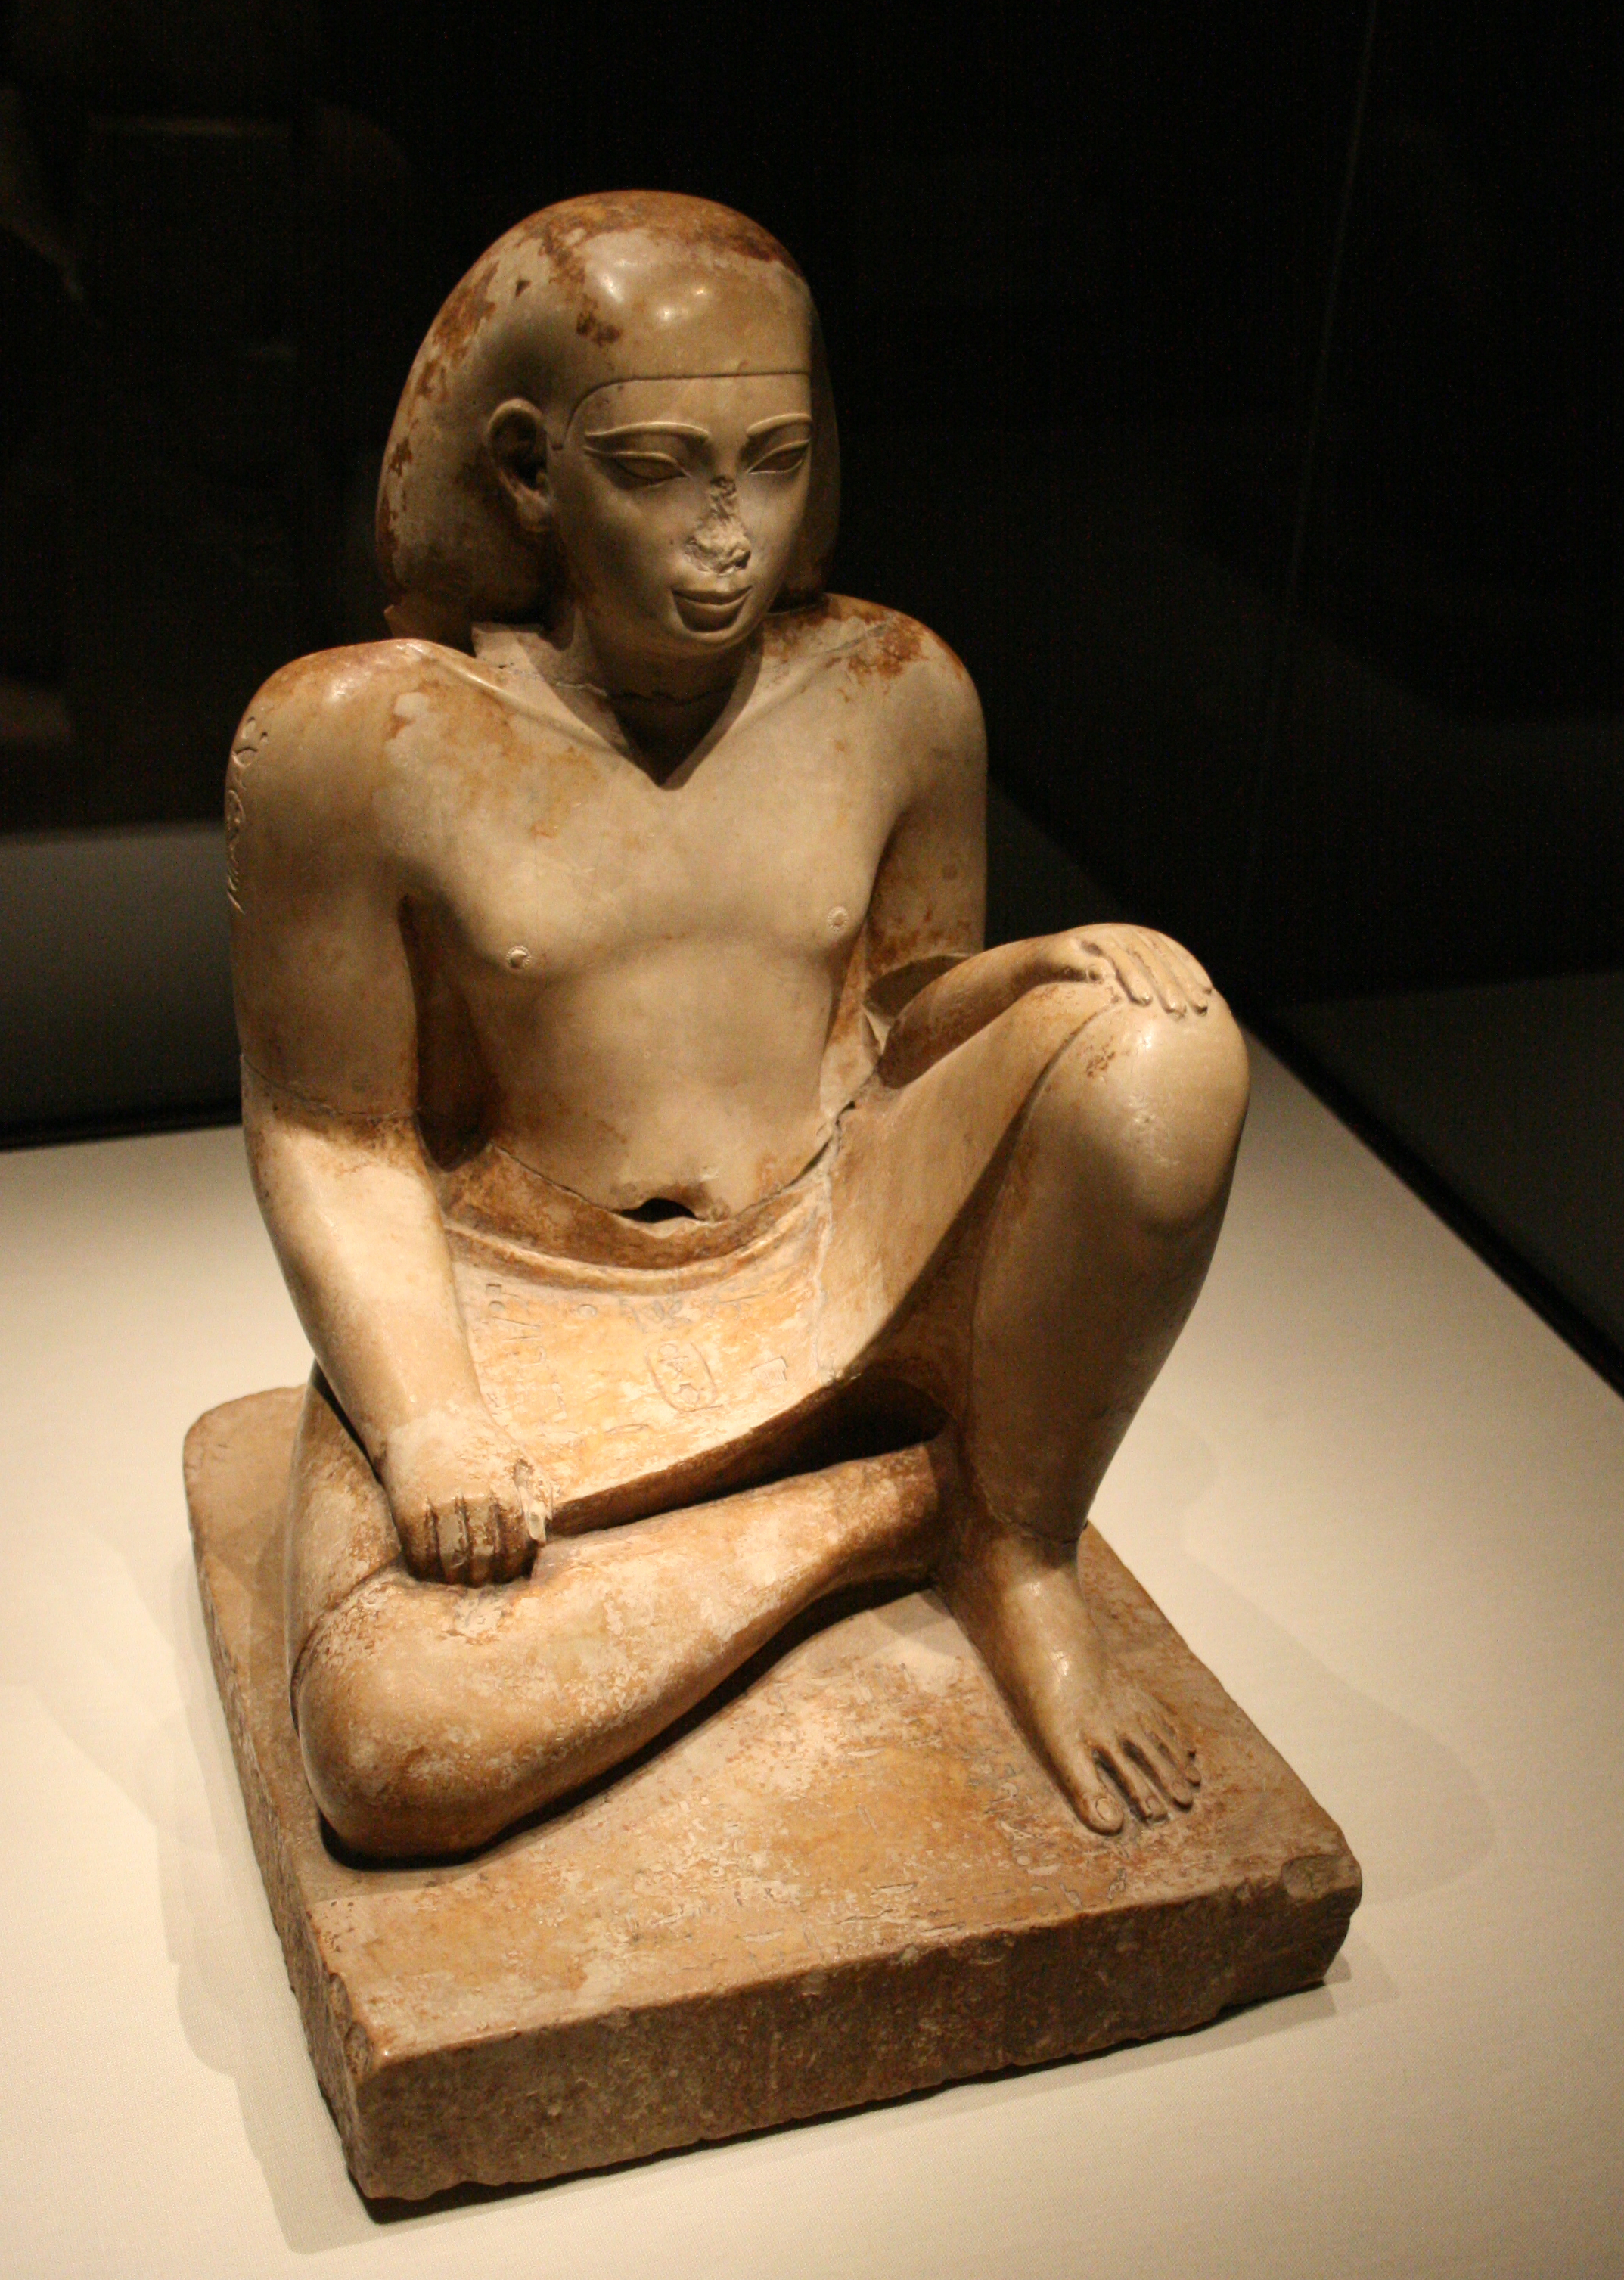 Statue of Bes, an Egyptian official (Gulbenkian Museum, photo by Szilas)